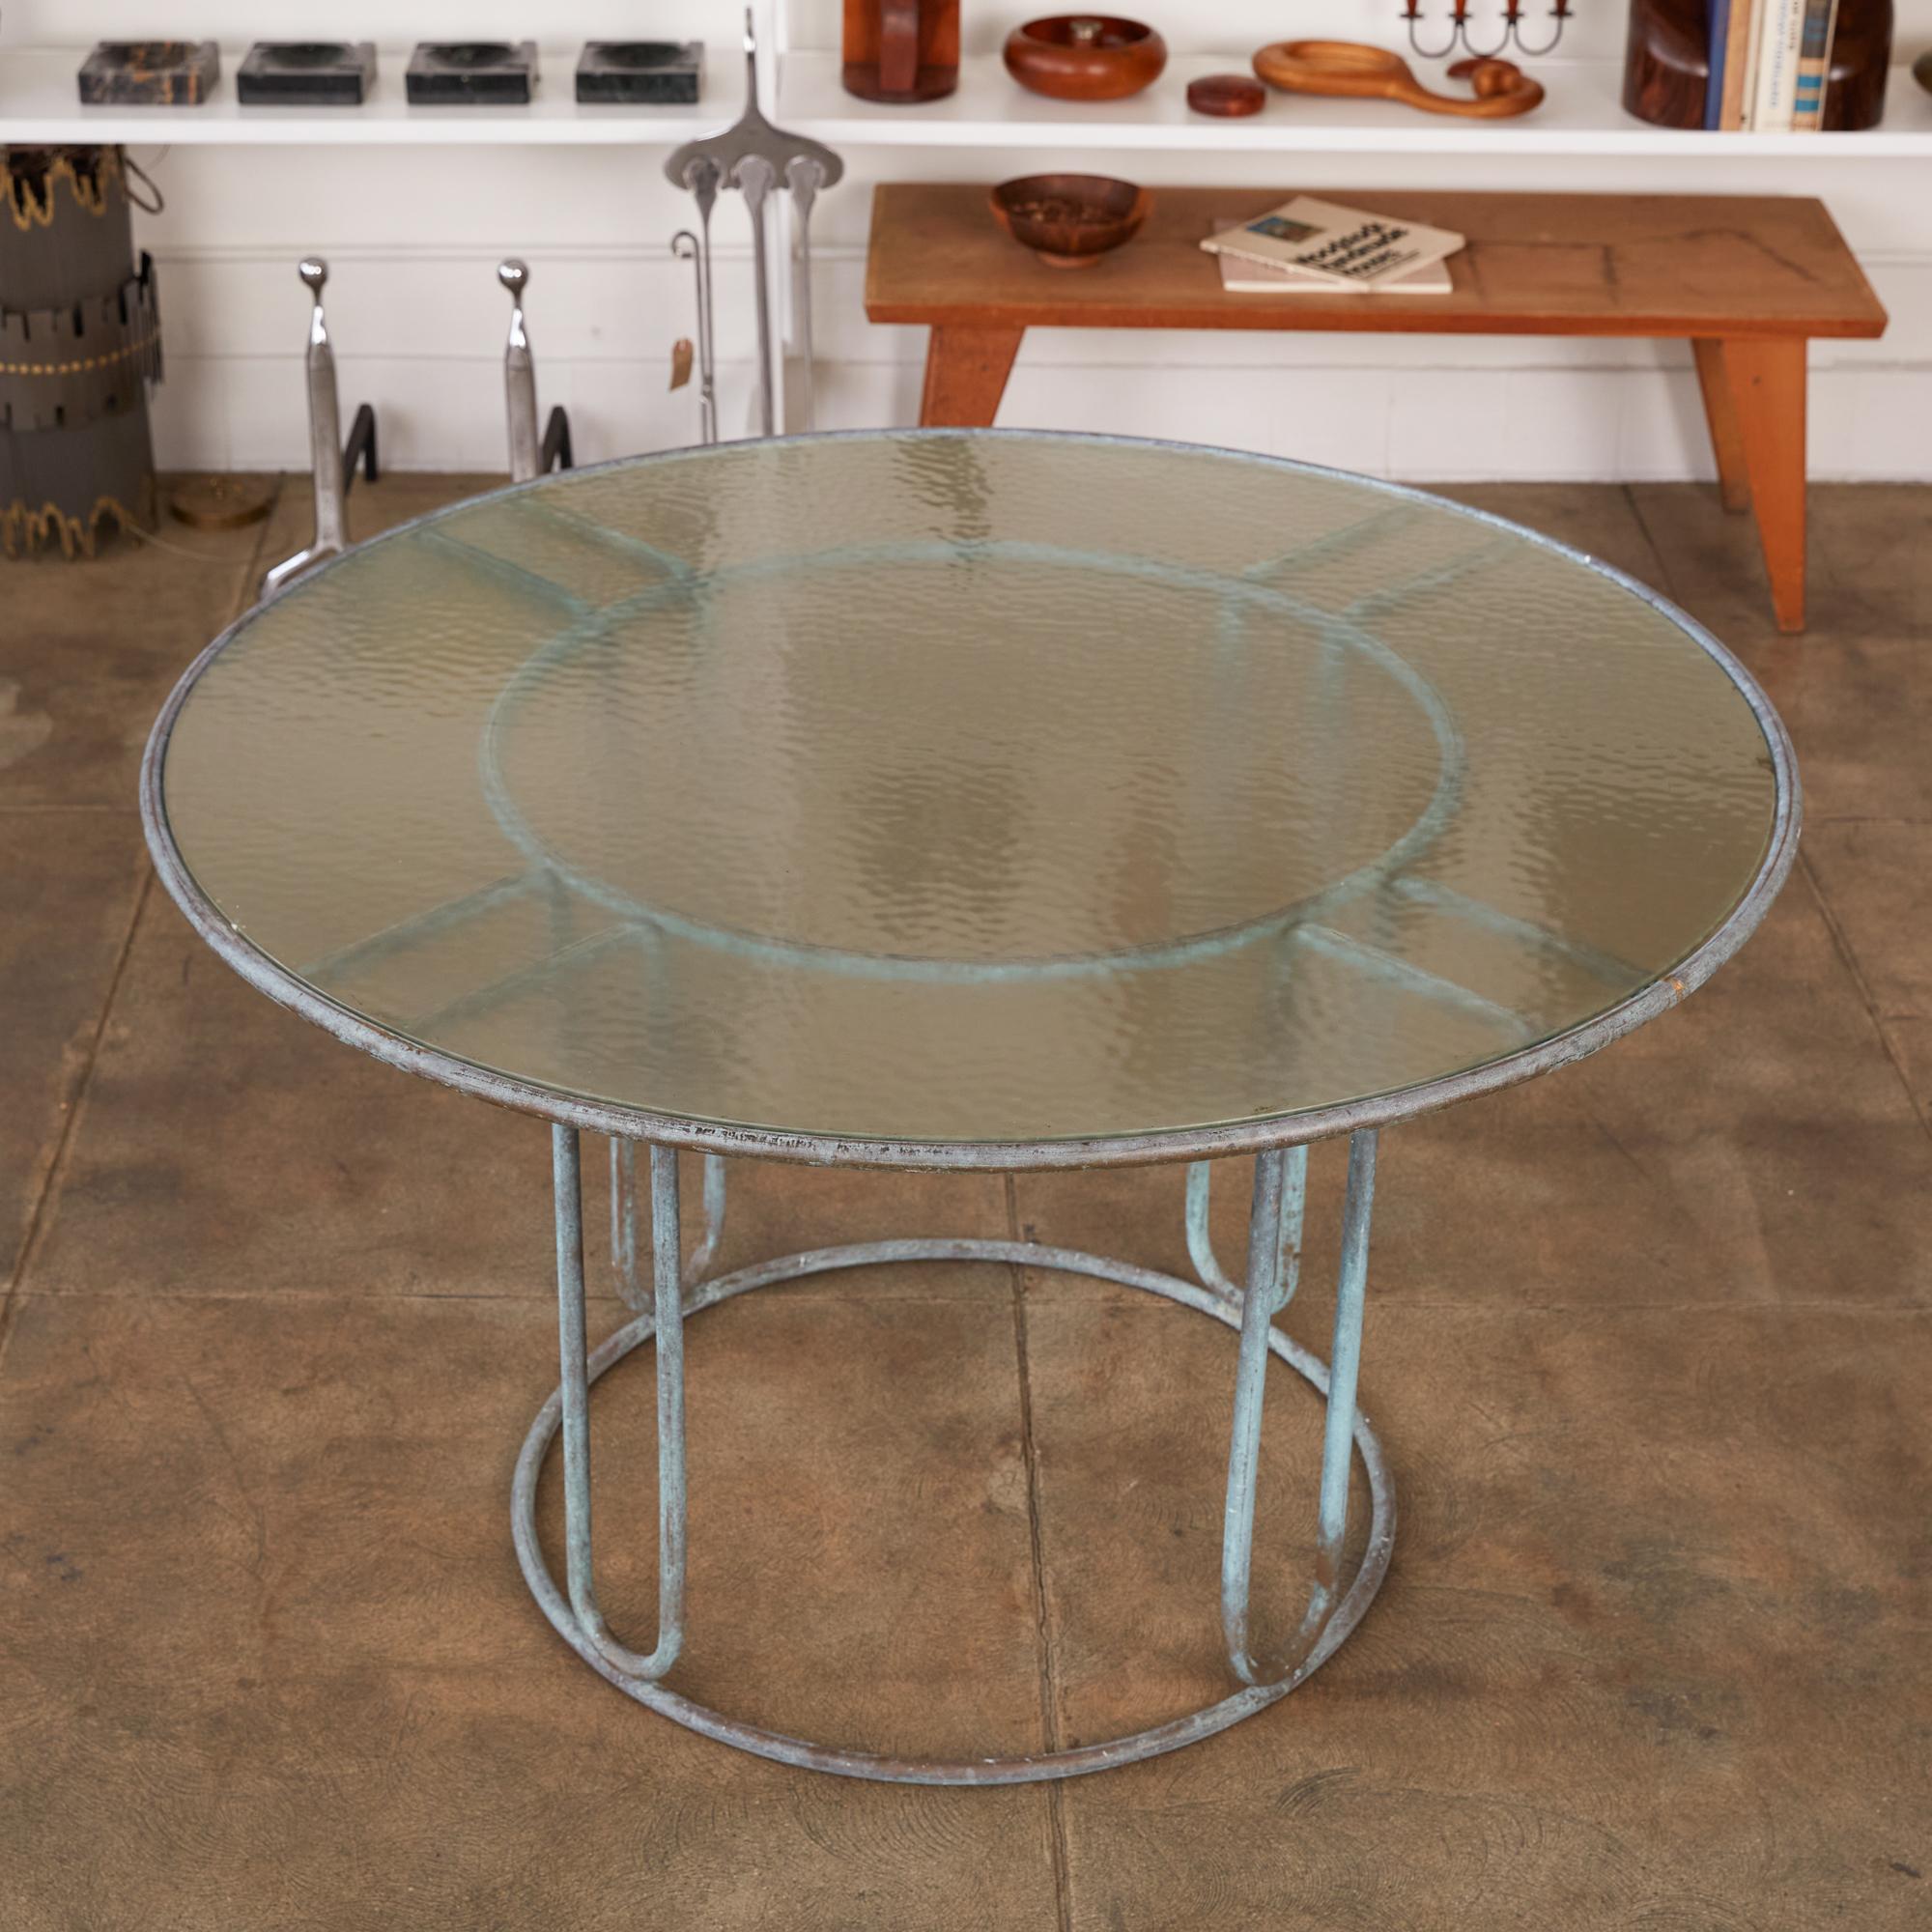 Mid-Century Modern Round Patio Table with Oxidized Bronze Frame by Walter Lamb for Brown Jordan